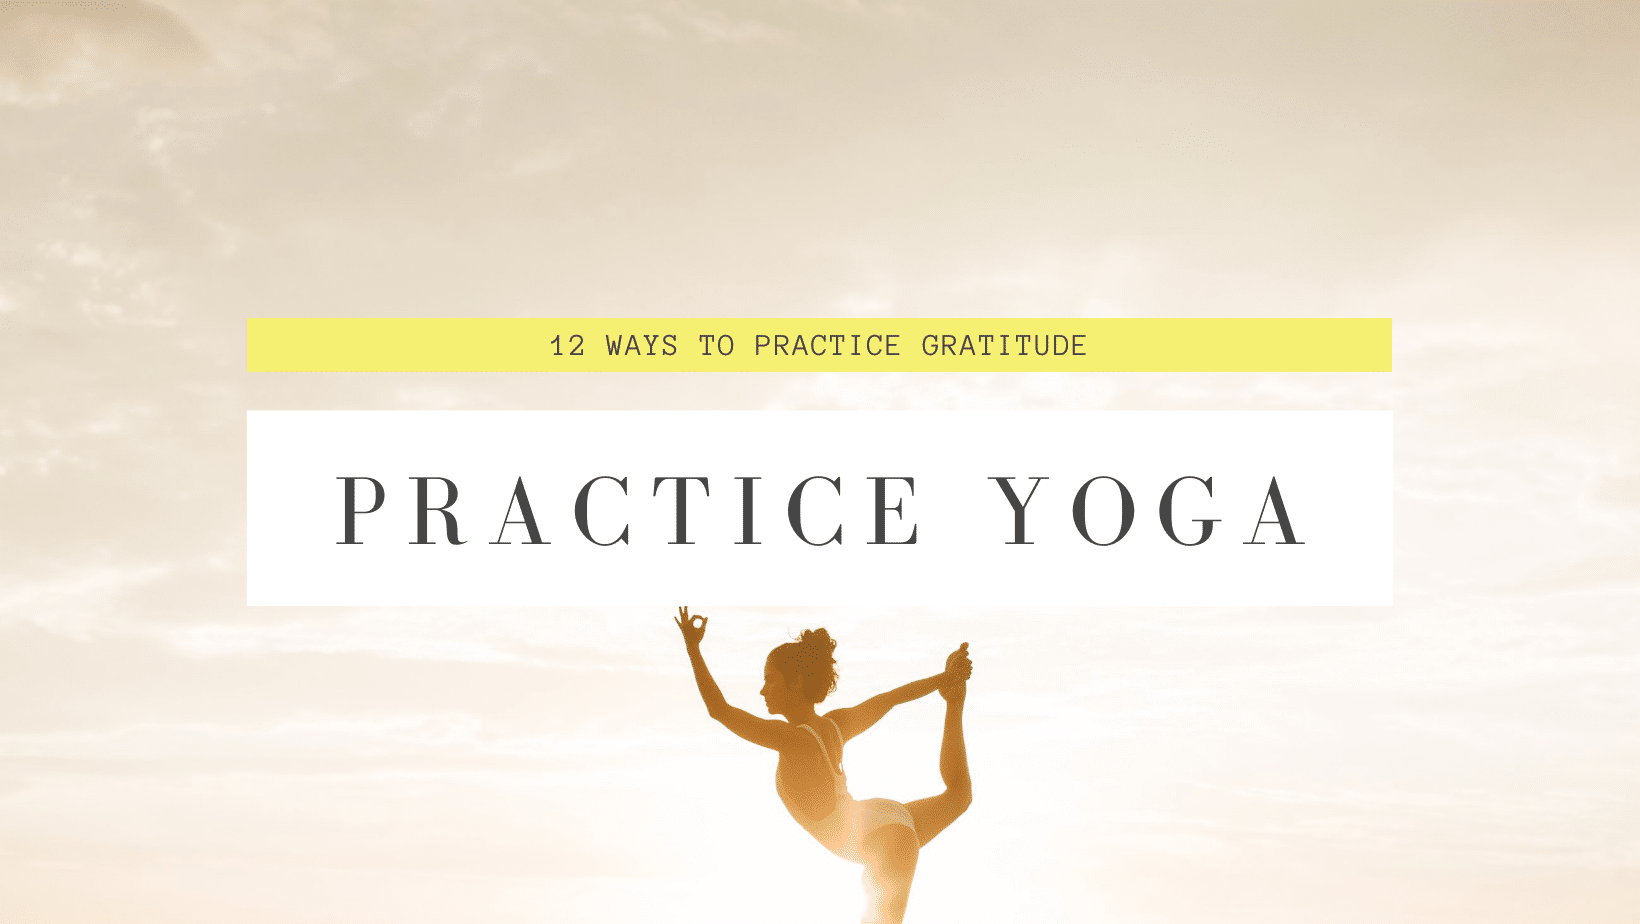 A woman stands in a yoga pose as she finds gratitude in practicing yoga.